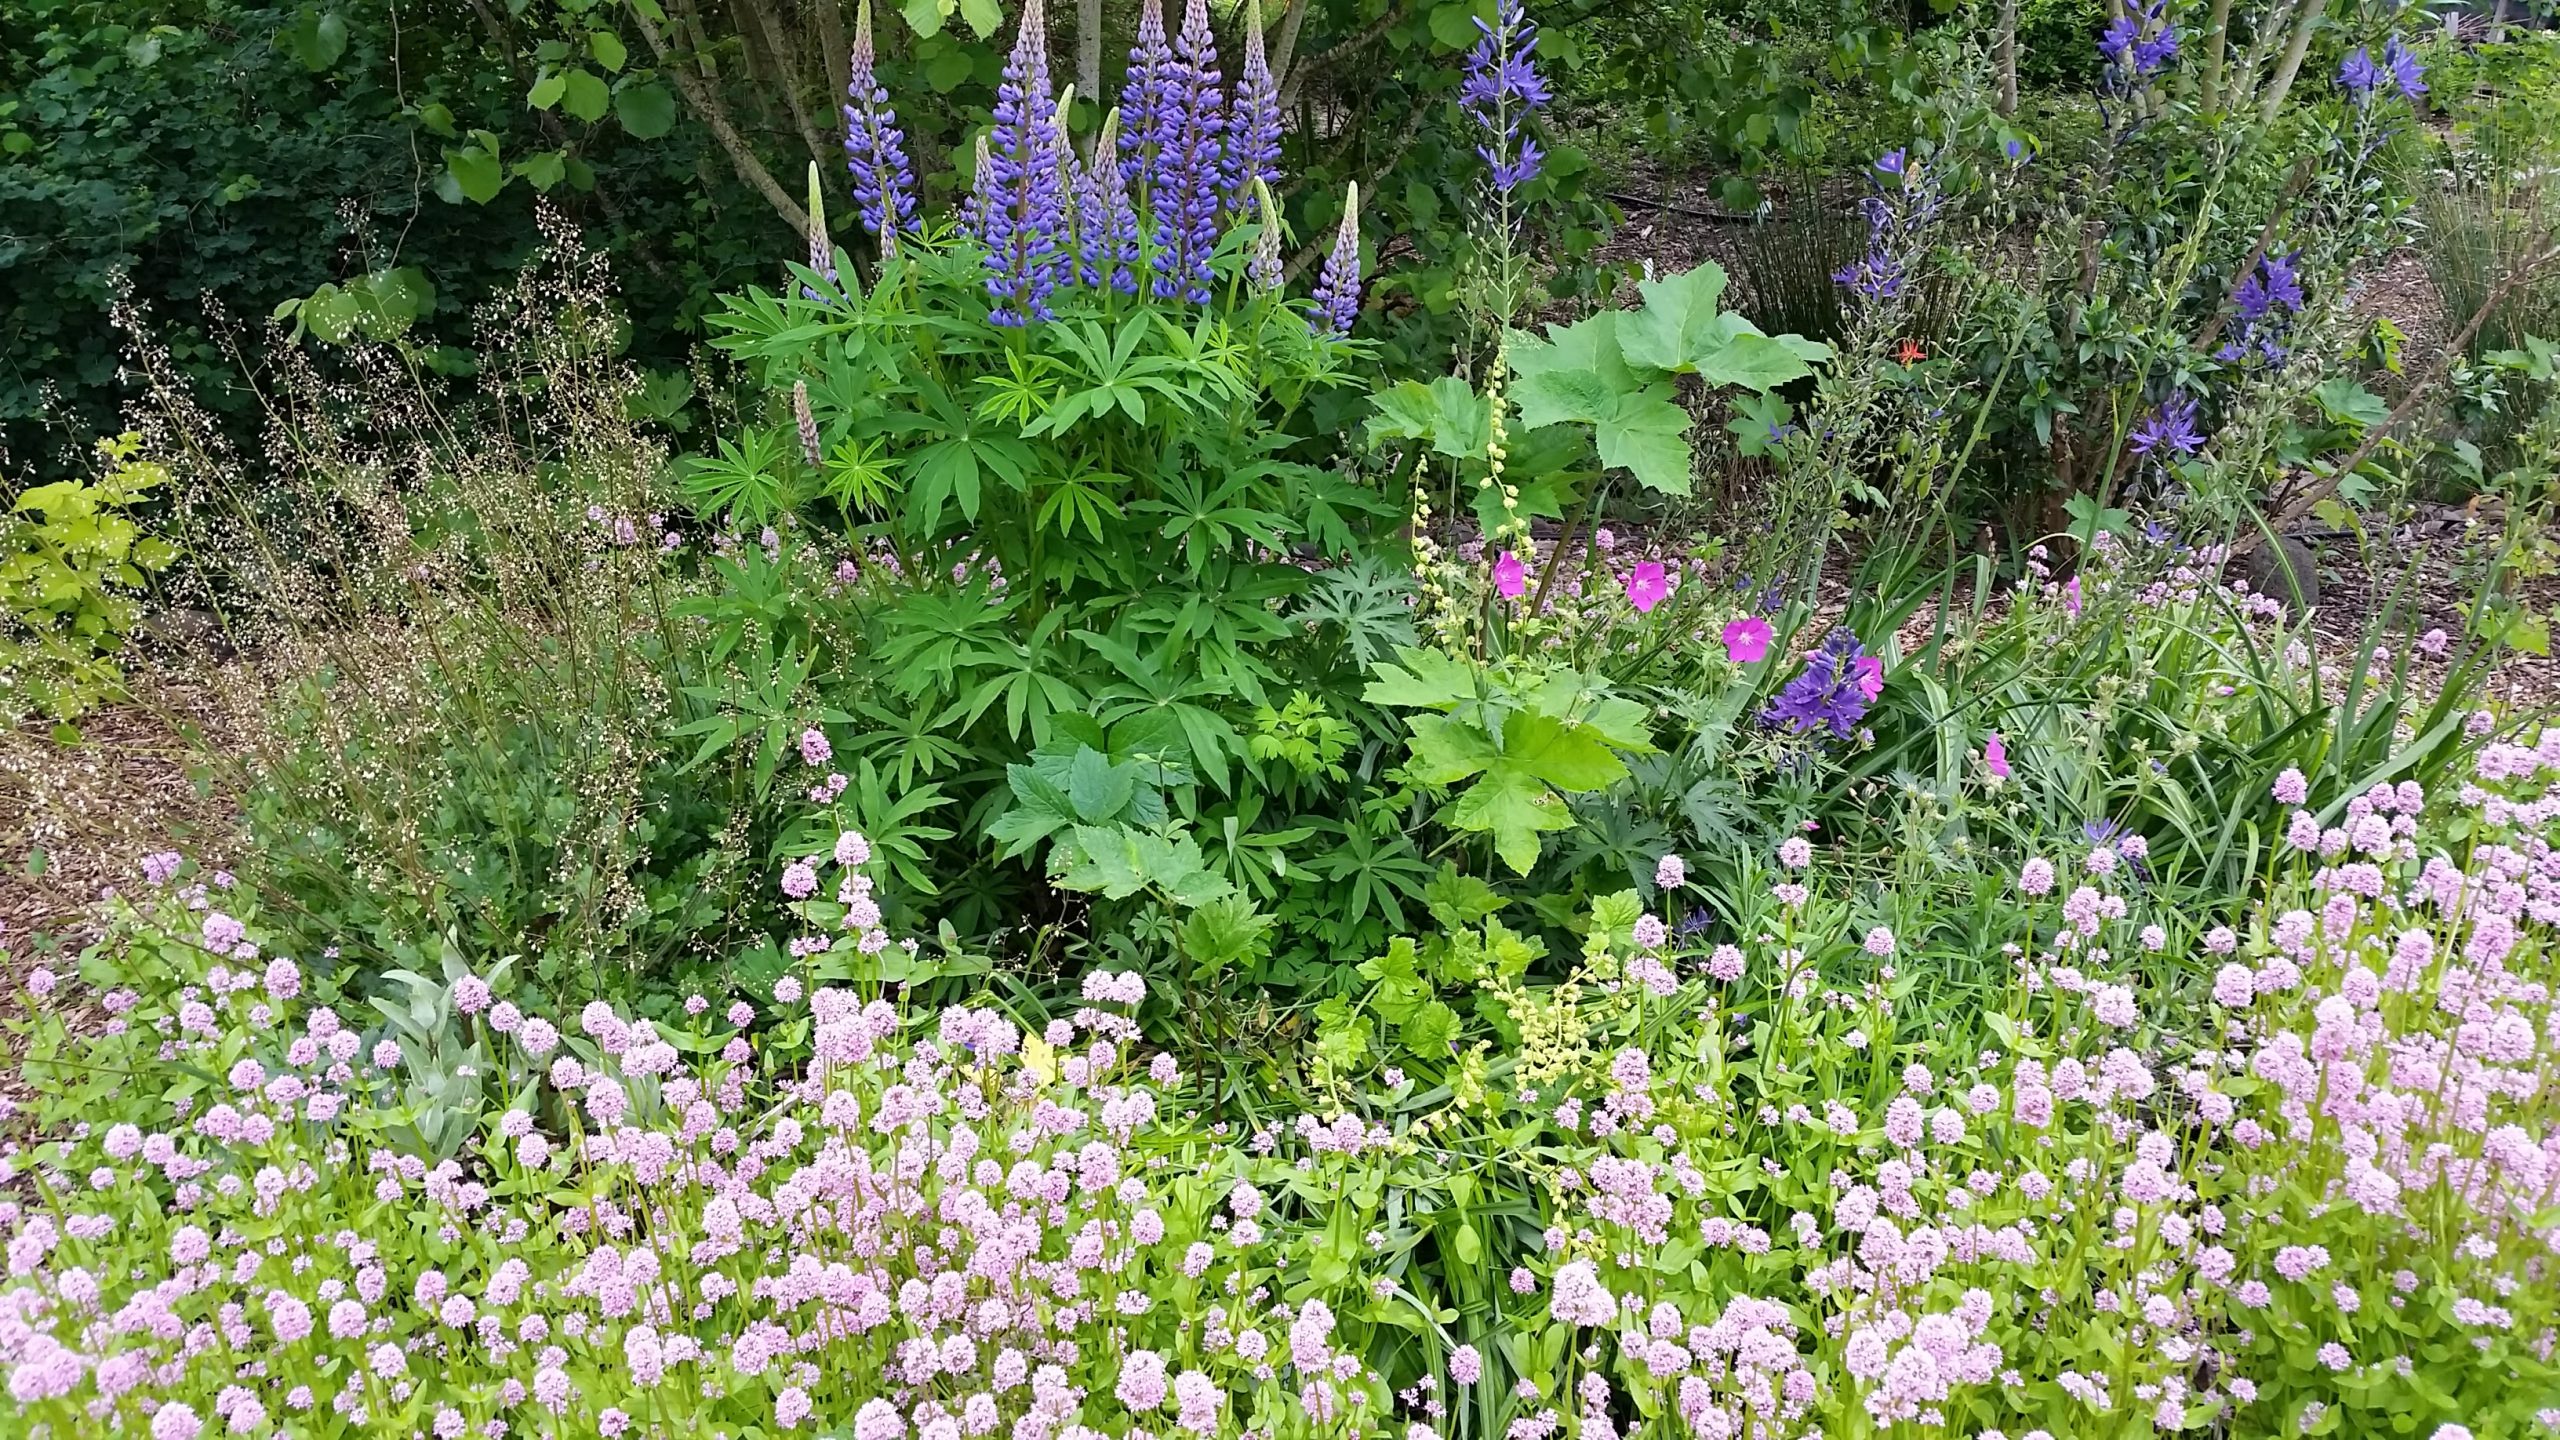 a native plant garden with lupine, sea blush, larkspur, co parsnip and other species